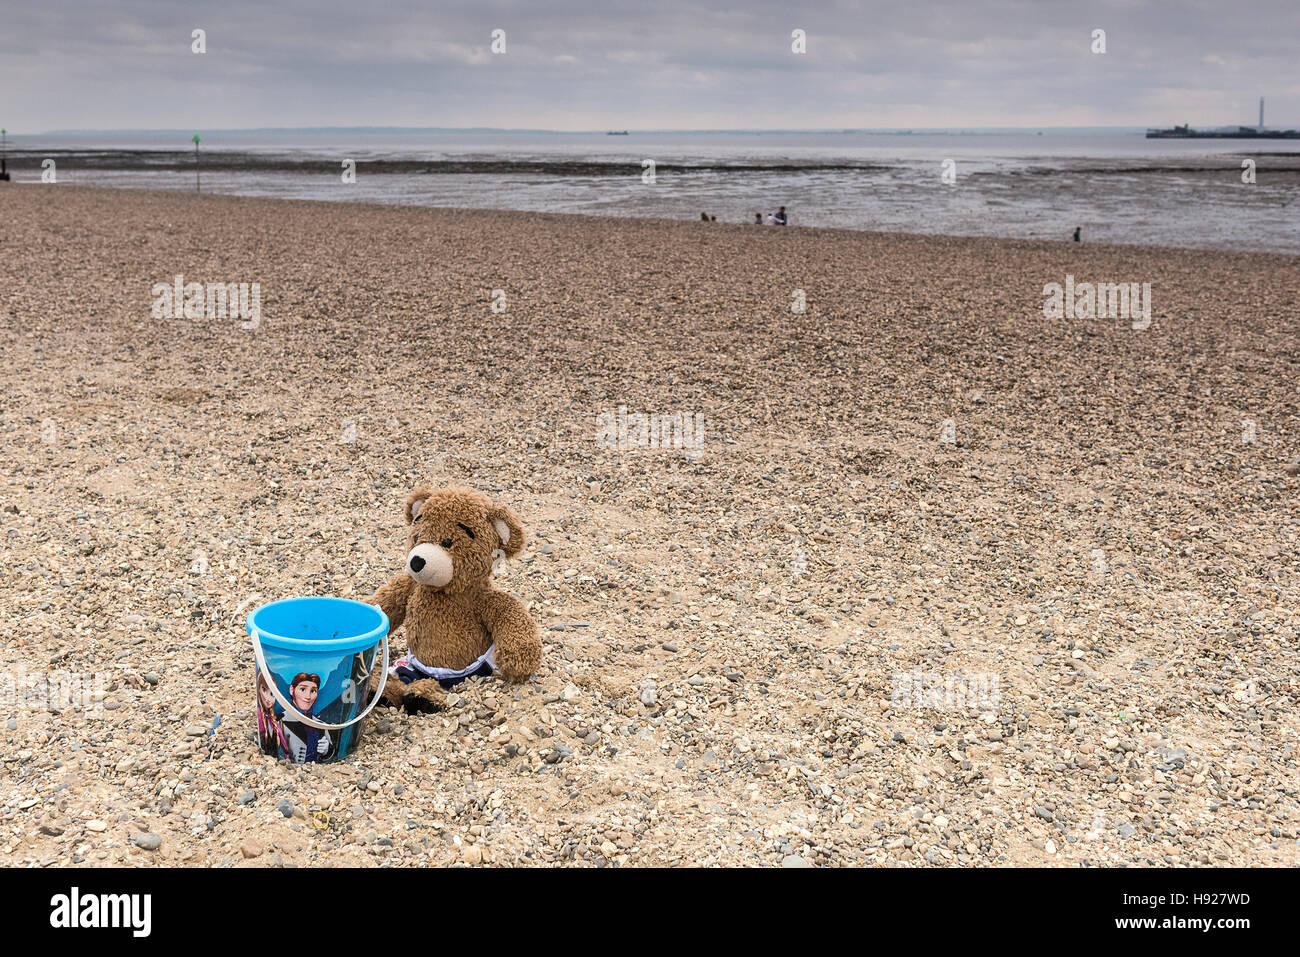 A teddy bear on Jubilee Beach in Southend on a cloudy day. Stock Photo